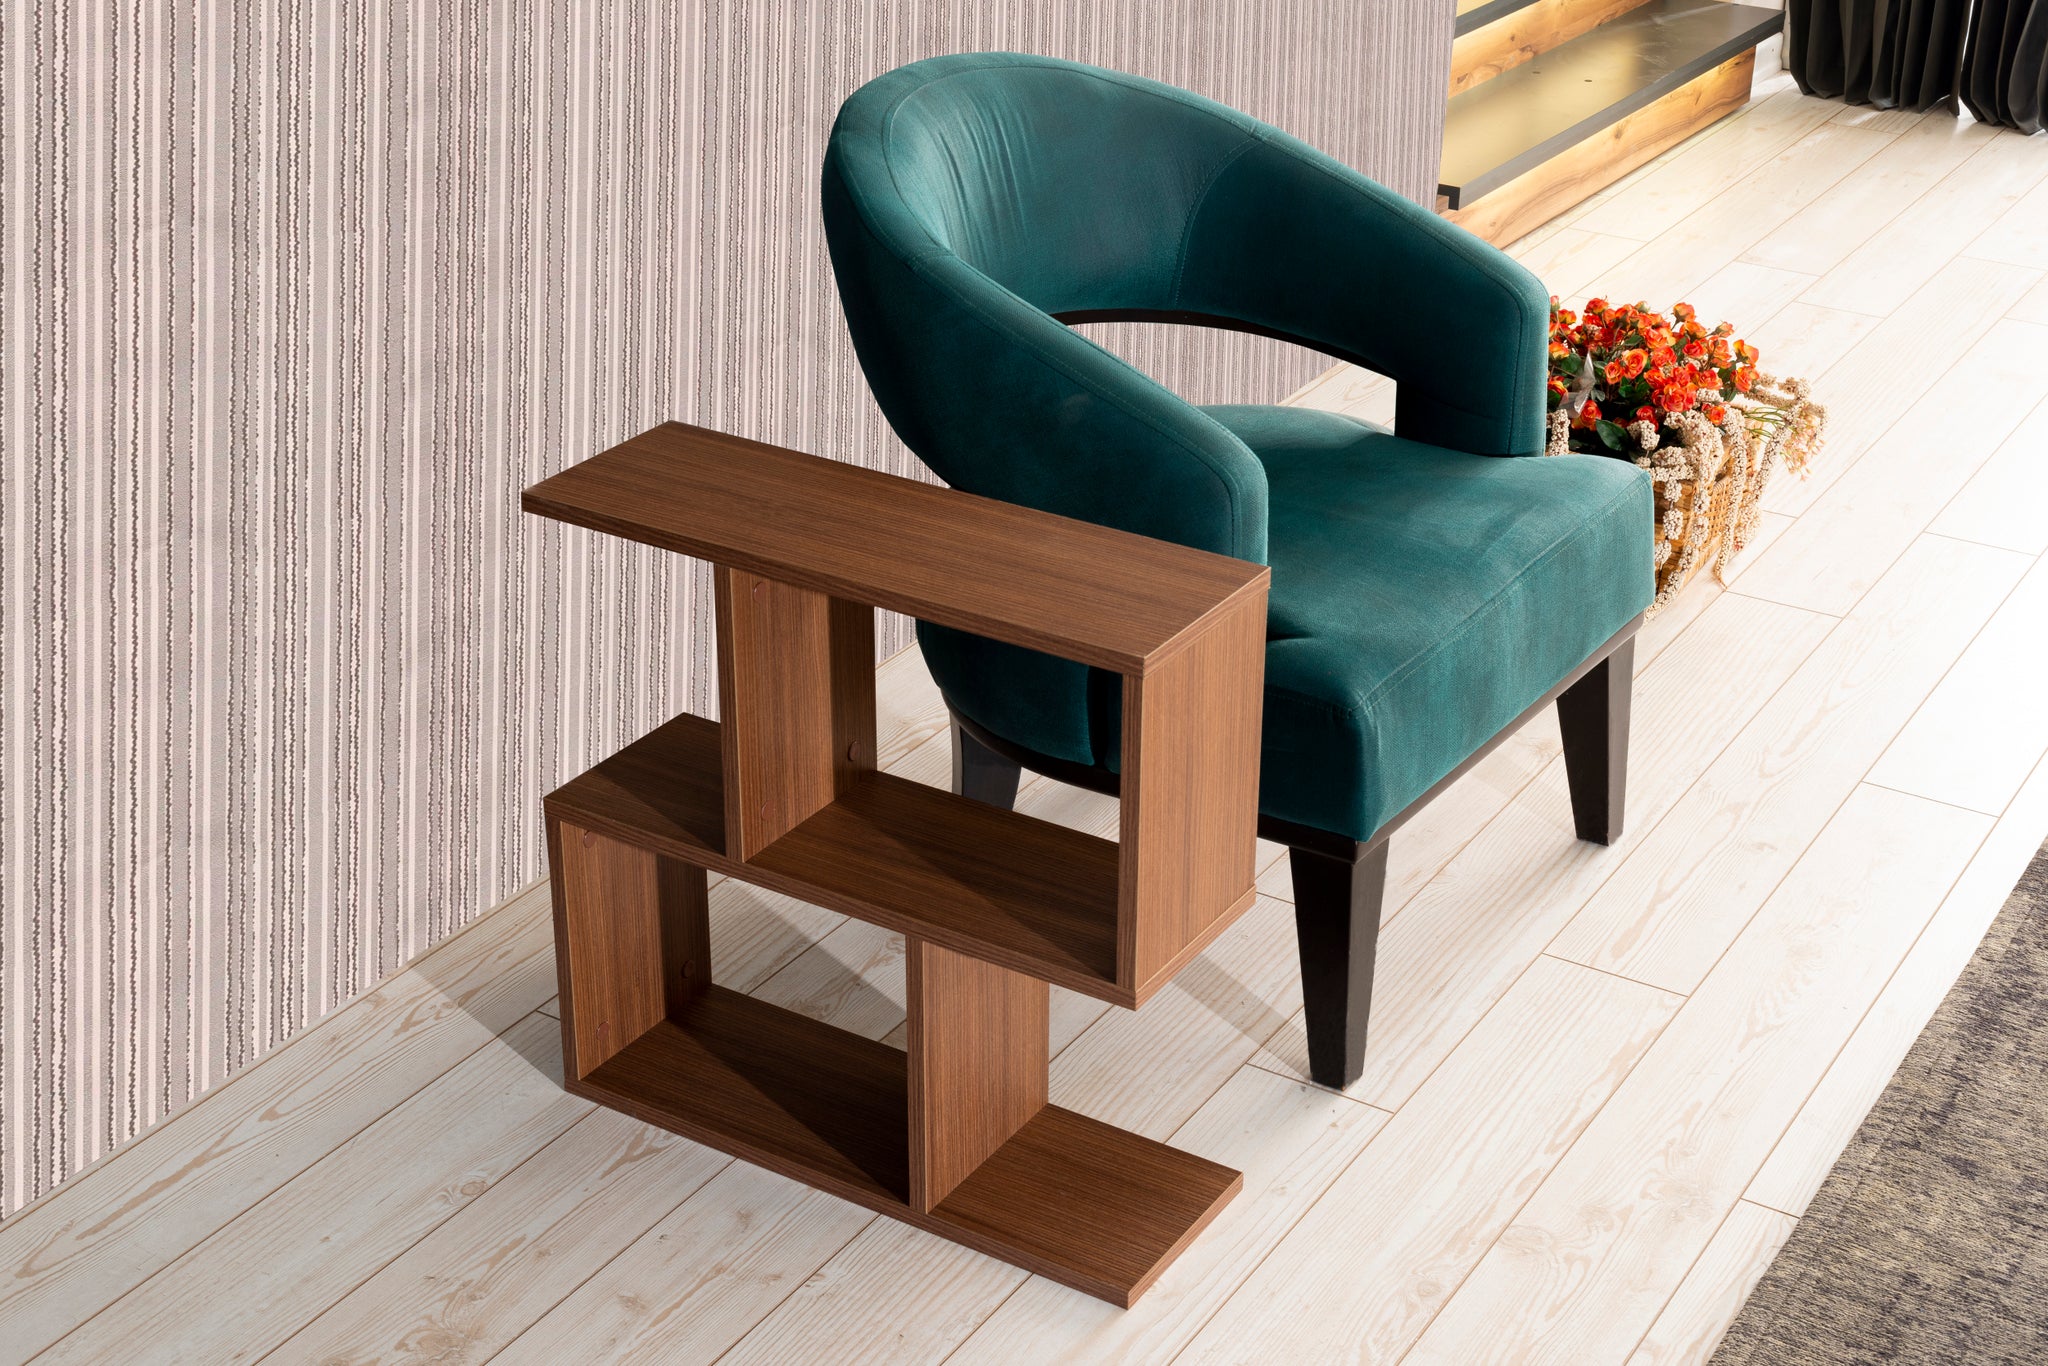 FurnisHome Store Alfa Rectangle 4 Shelves End Table walnut-solid wood